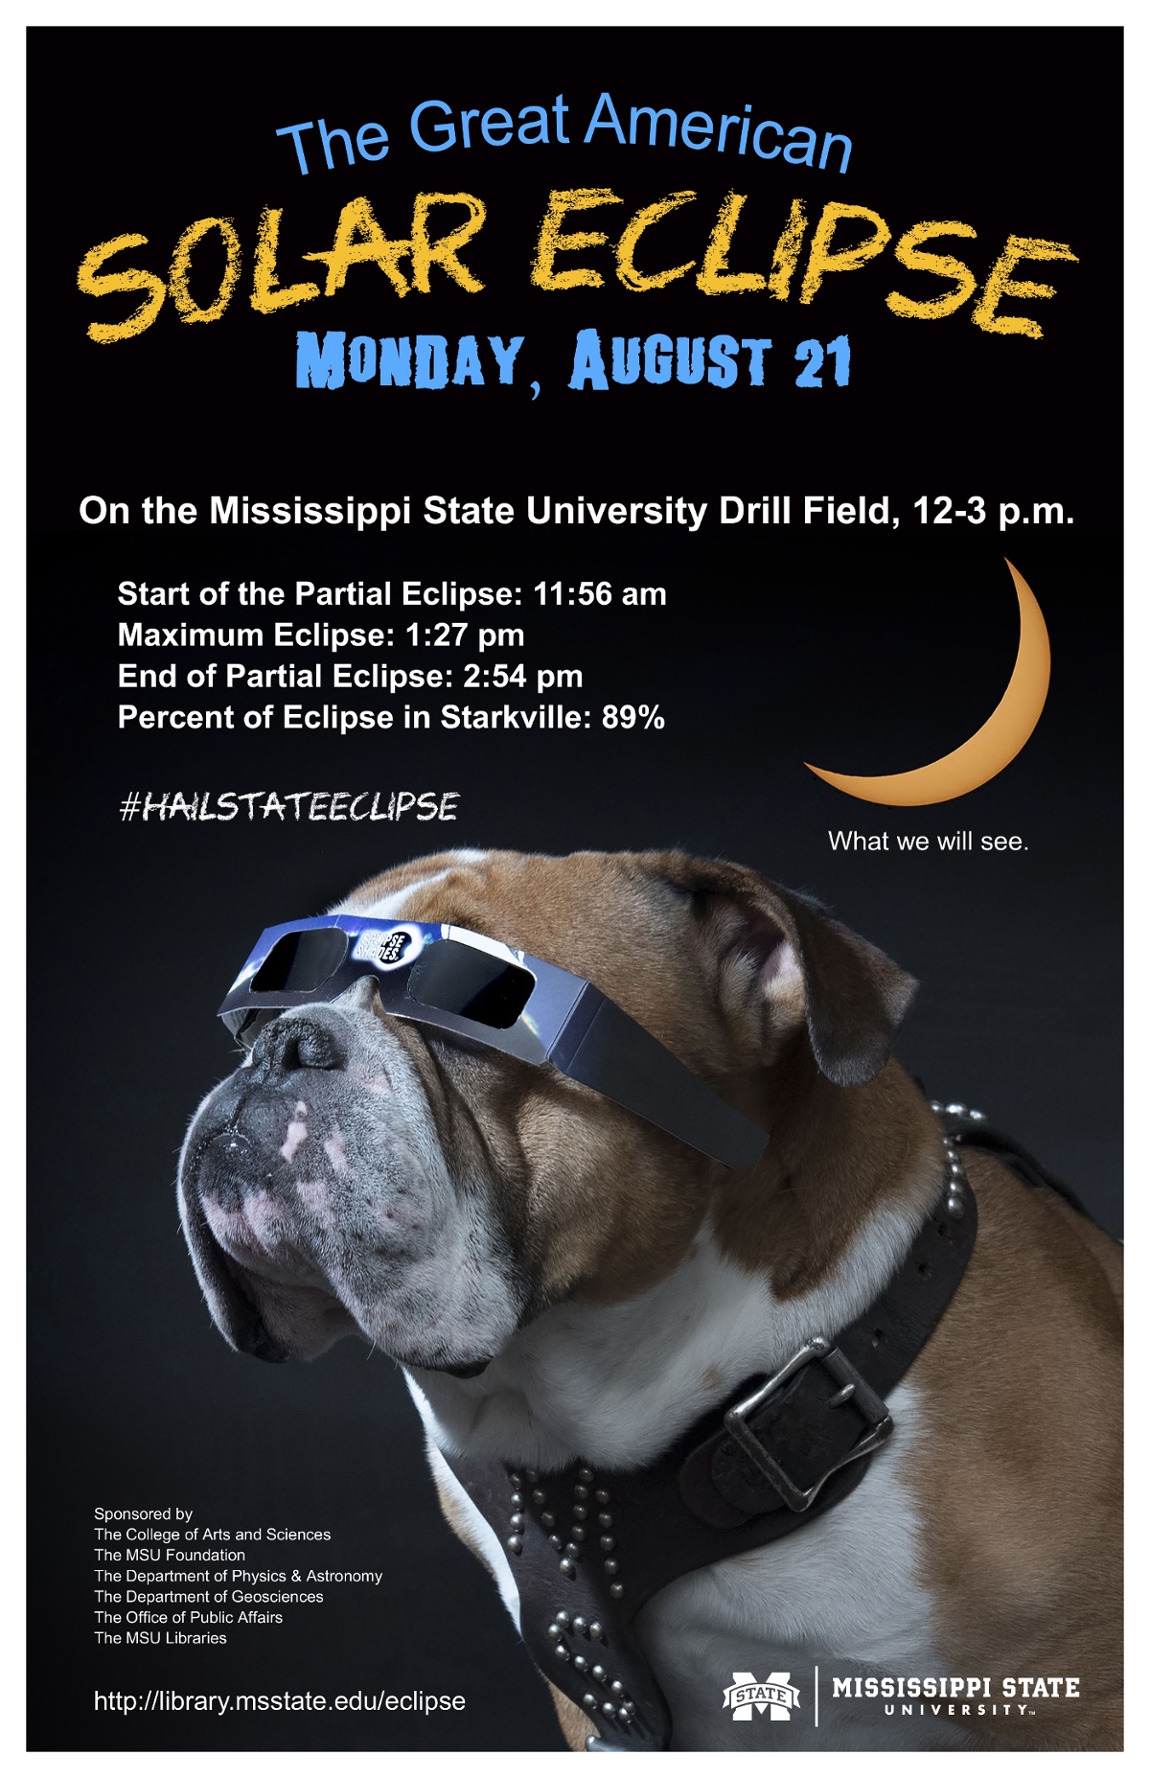 Bulldog wearing eclipse glasses in promotion of watching the solar eclipse on the Drill Field